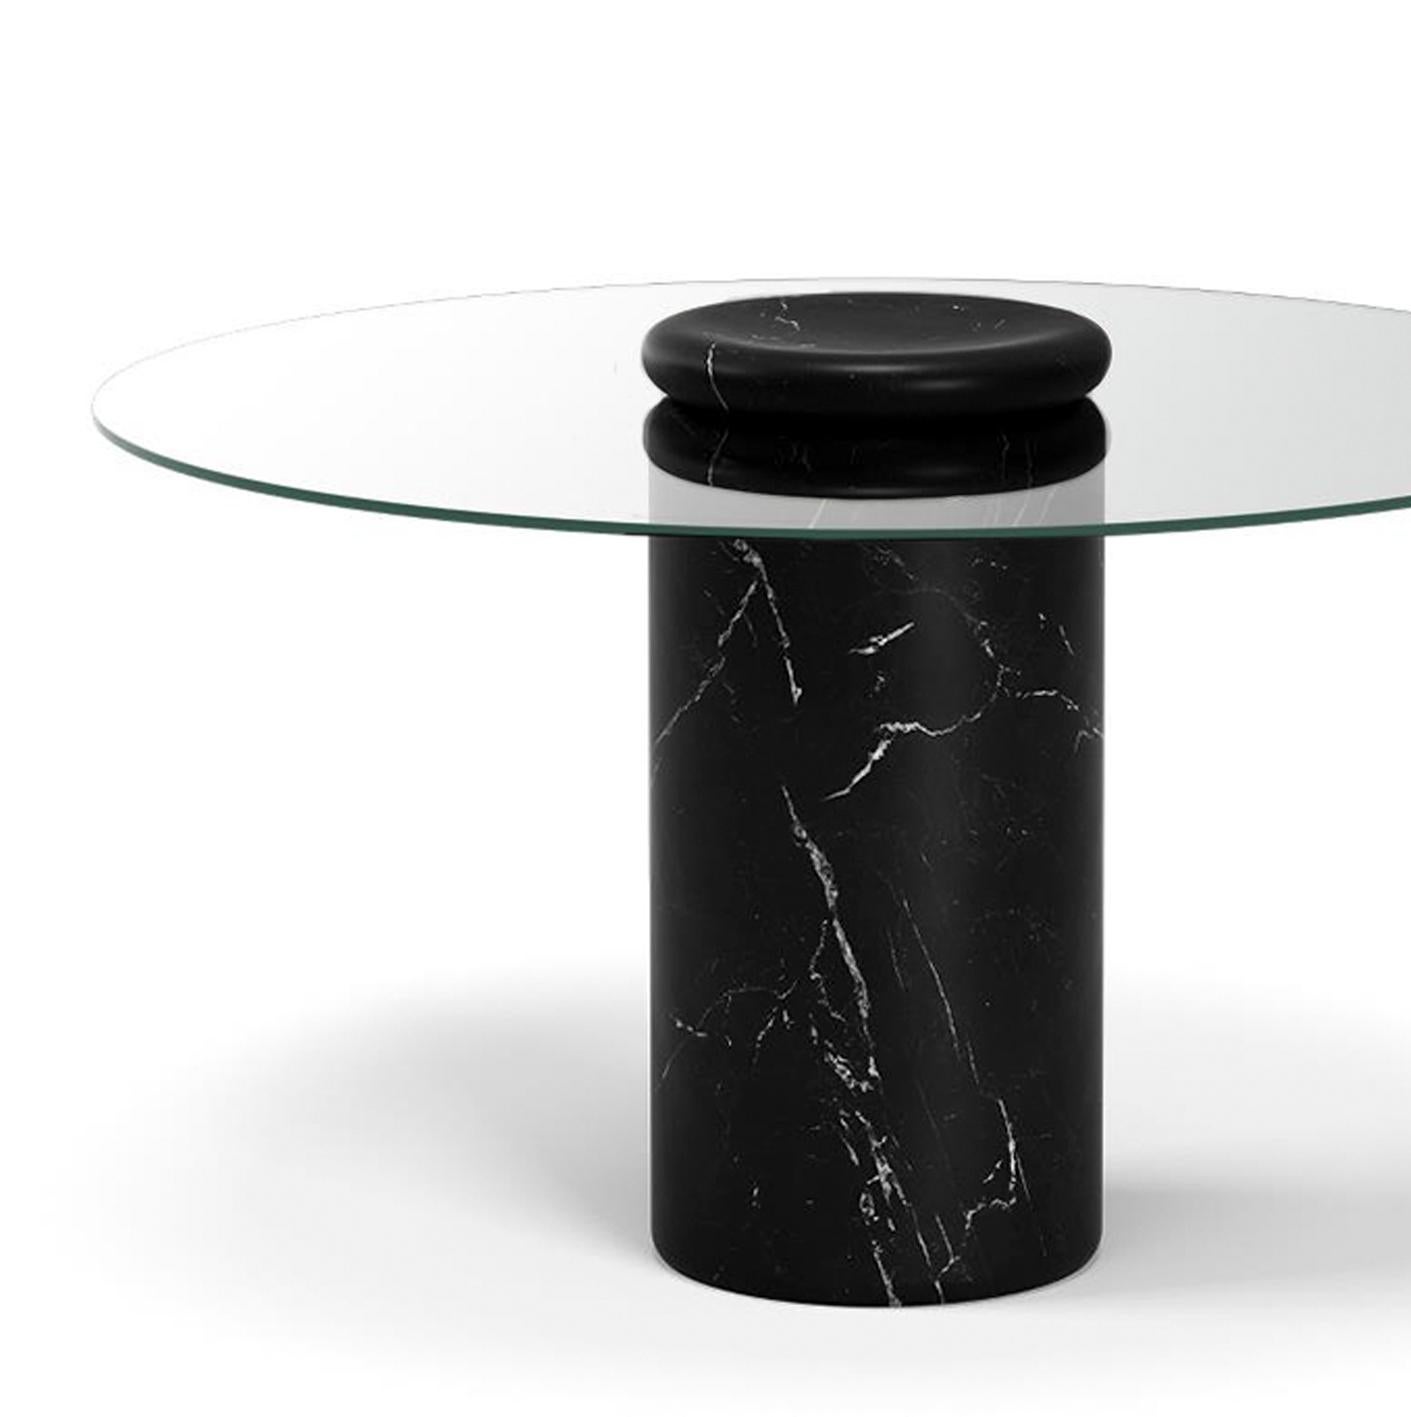 Table designed by Angelo Mangiarotti 

Castore is a glass and marble table by Italian architect, sculptor and designer Angelo Mangiarotti. Designed in 1975 for Sorgente dei Mobili, the distinct design is now presented by Karakter, available as a